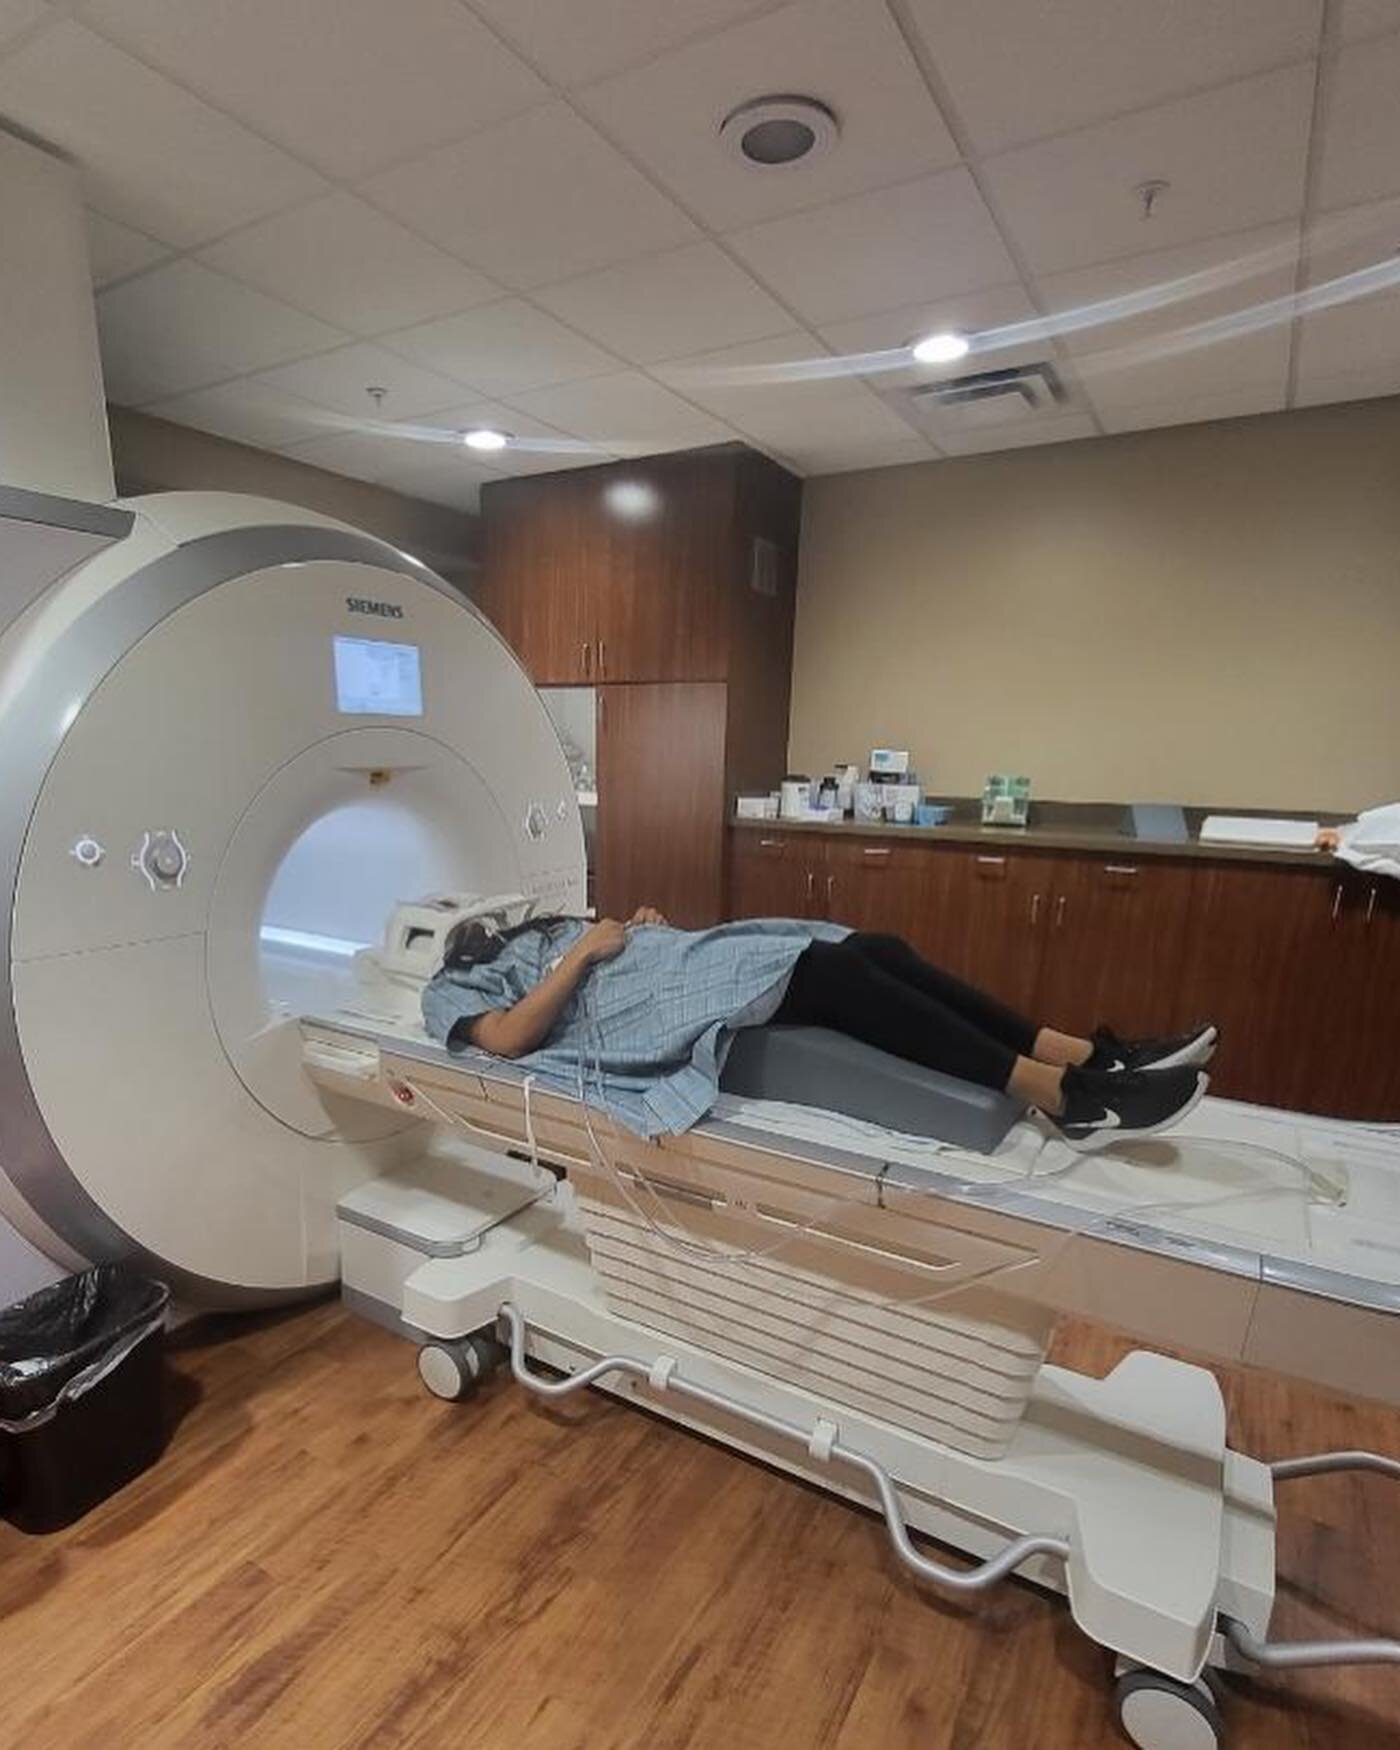 This is me getting a routine MRI for #MultipleSclerosis. Sure, lots of people have to get MRIs for varied reasons. But everytime I lay down to get an MRI, I deal with the PTSD of being diagnosed all over again. Being told my x-rays came back &ldquo;s